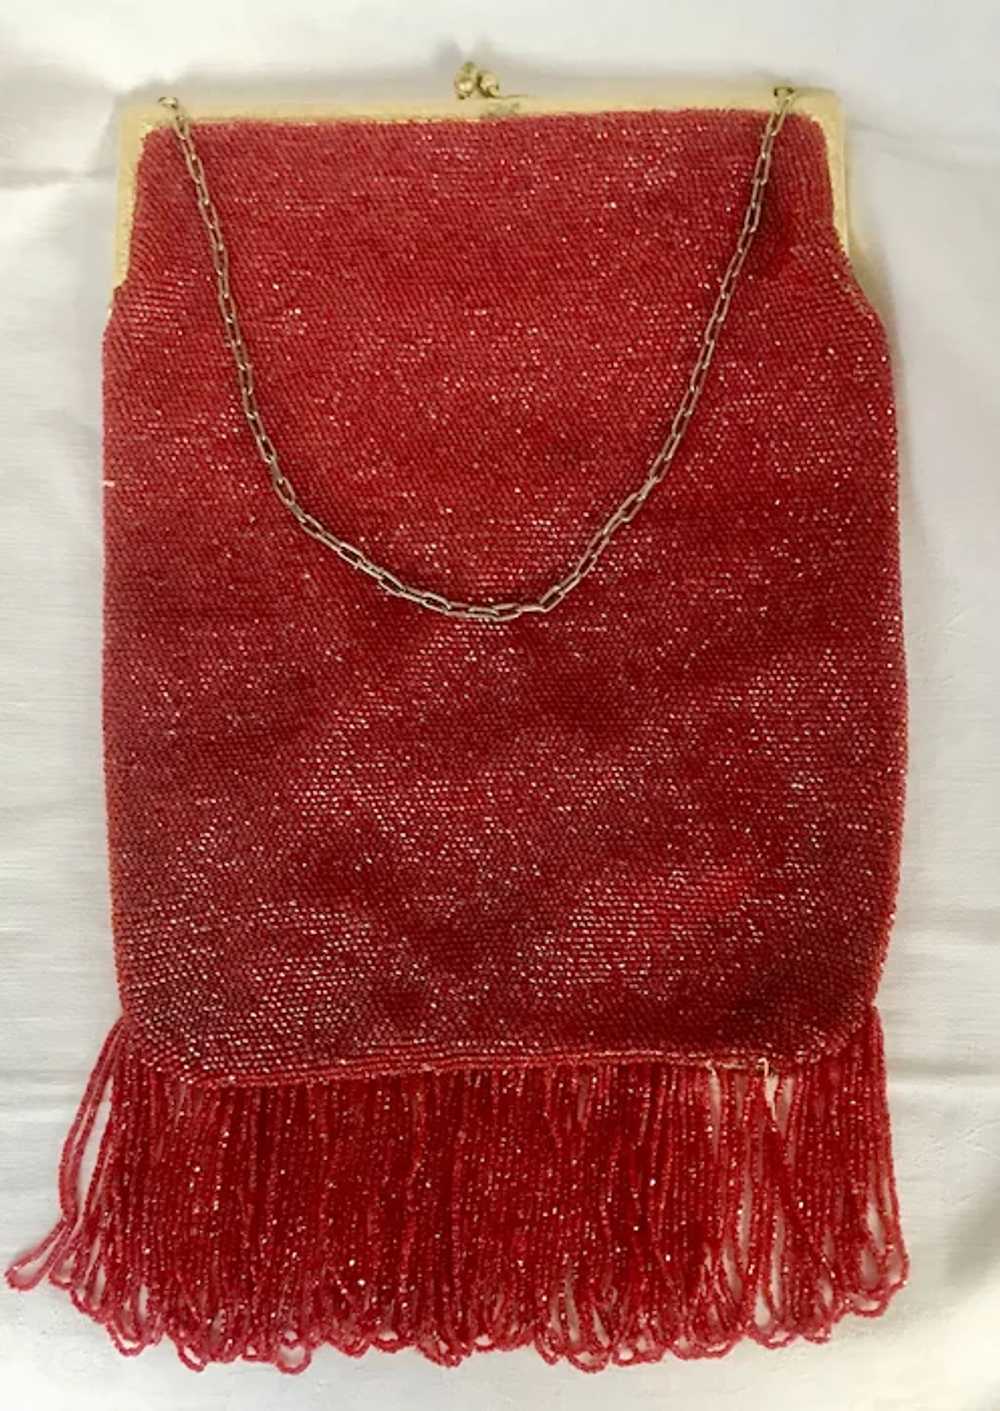 Vintage Large Red Micro Glass Bead Flapper Bag - image 5